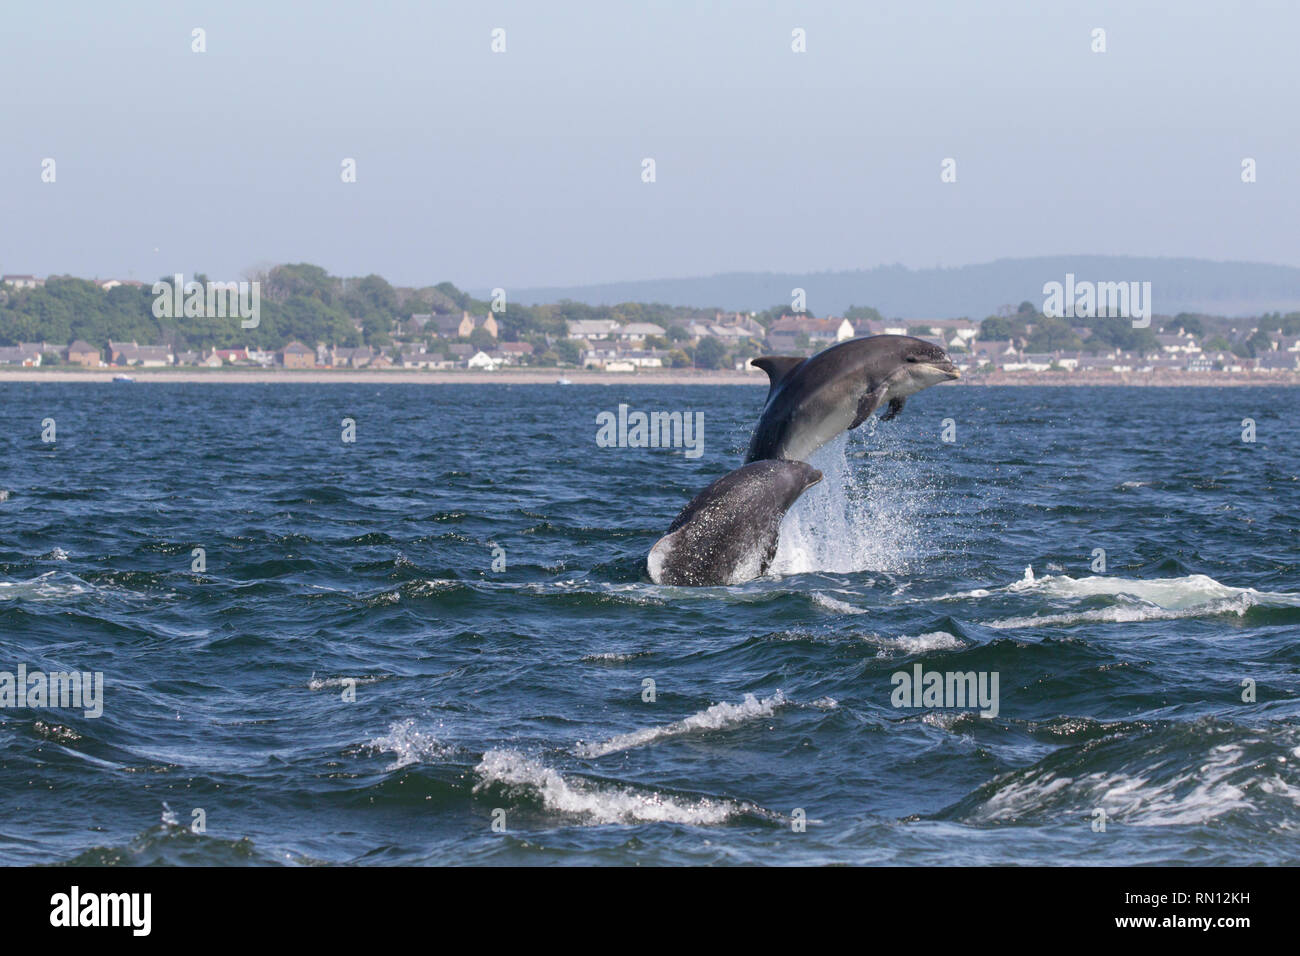 Two Bottlenose dolphins (Tursiops truncatus) leaping/breaching in the Moray Firth, Chanonry Point, Black Isle, Scotland, UK, Europe Stock Photo